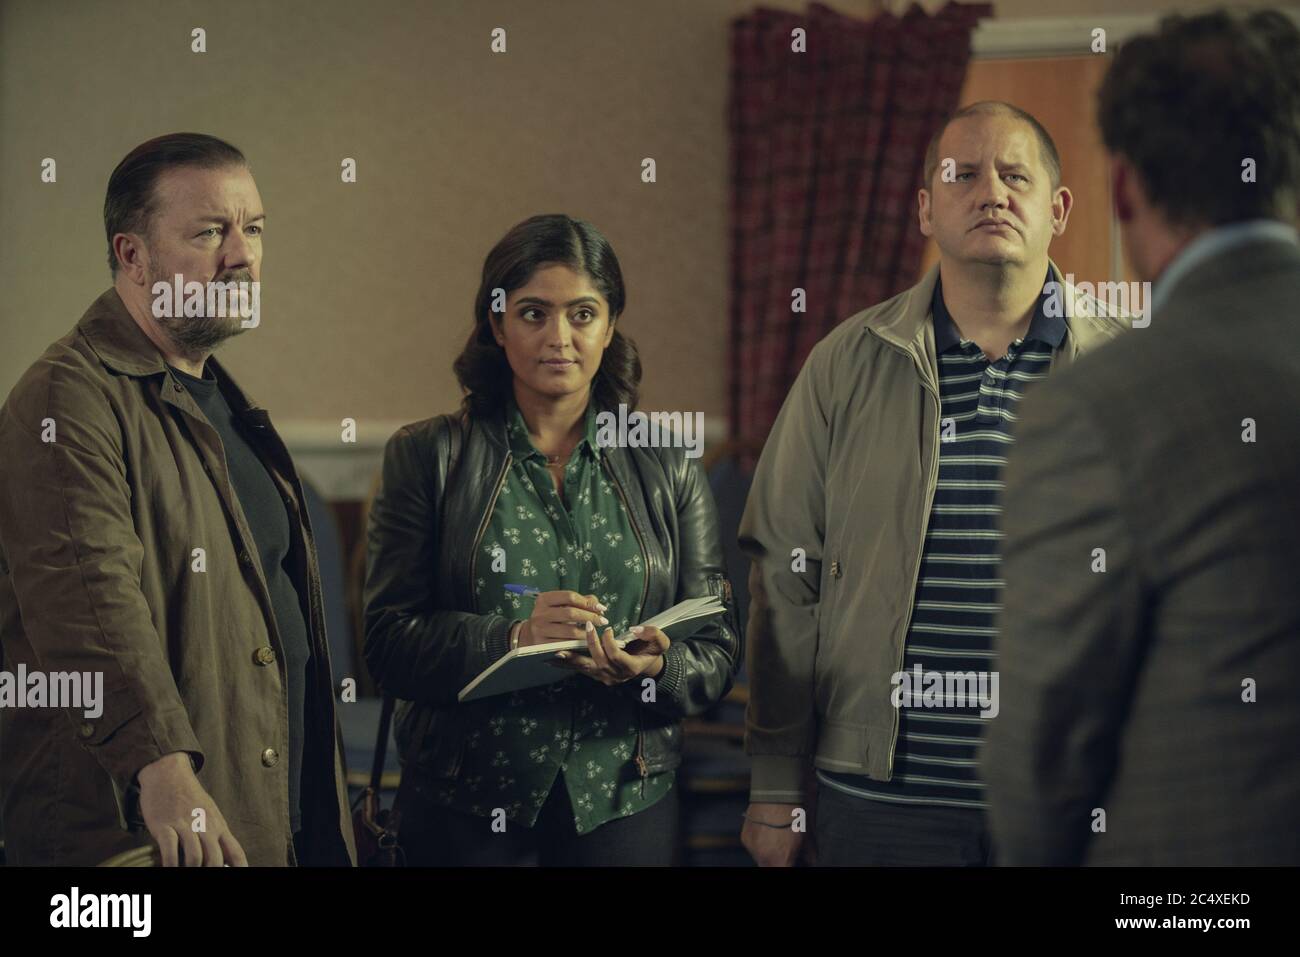 Ricky Gervais, Mandeep Dhillon, Tony Way, 'After Life' saison 2 (2020) crédit: Natalie Seery / Netflix / The Hollywood Archive Banque D'Images